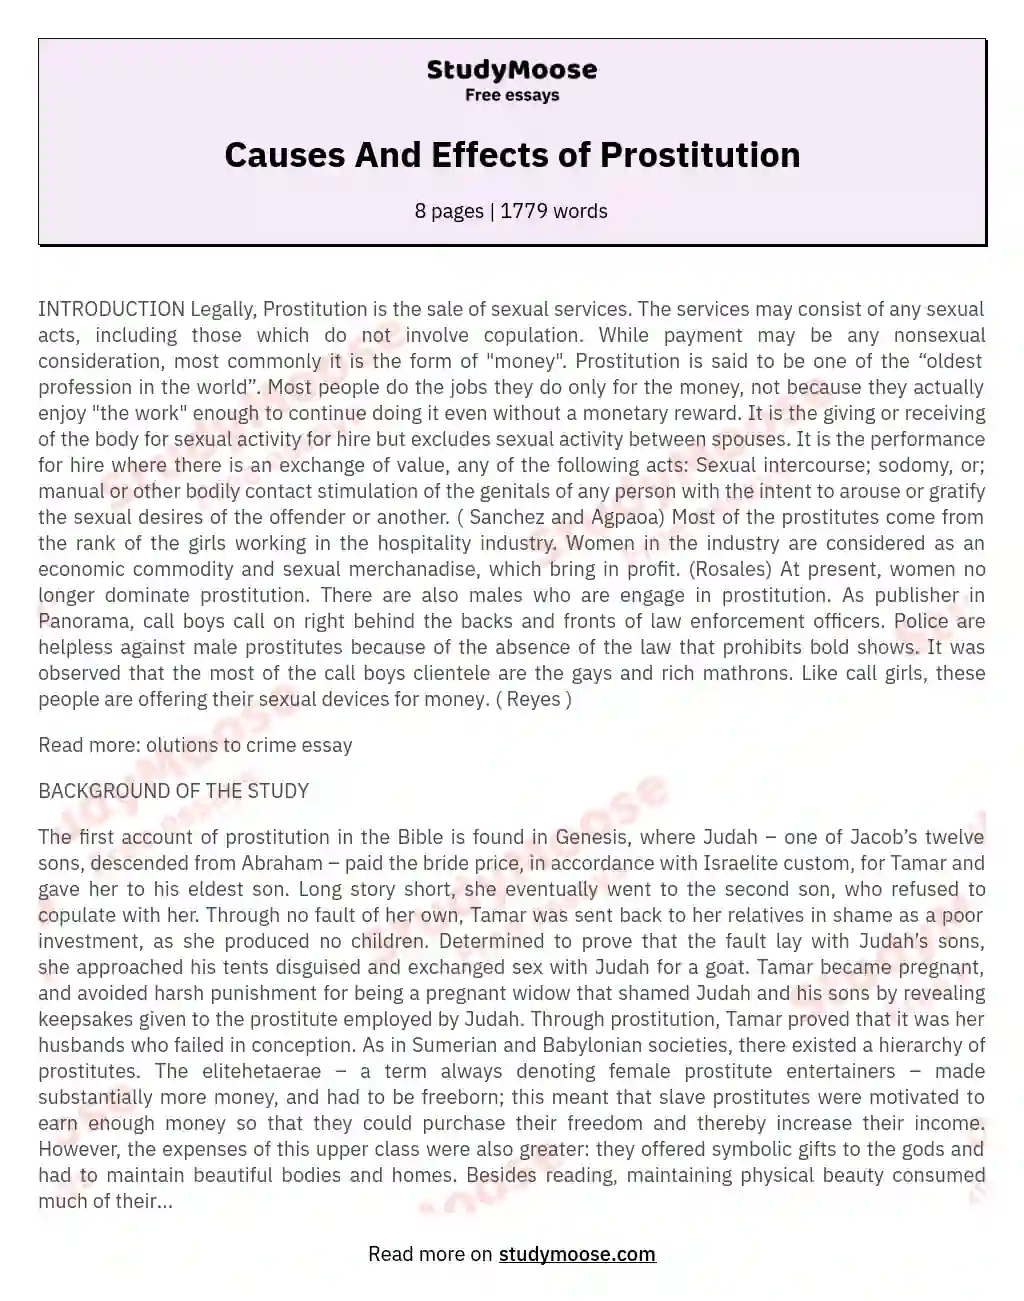 Causes And Effects of Prostitution essay